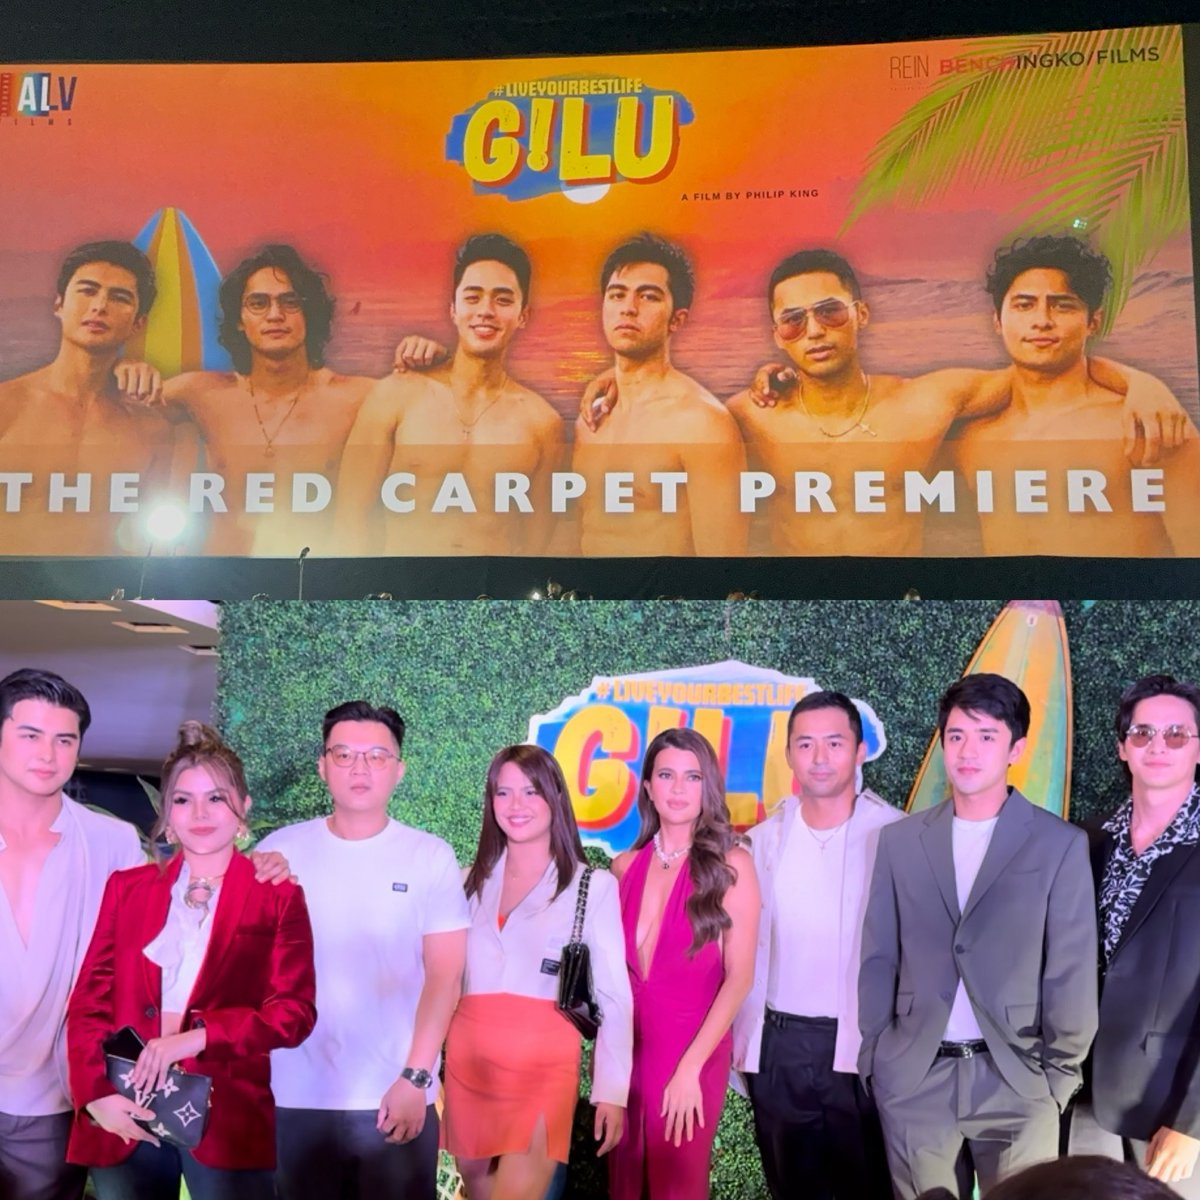 #GLUMovie is a fun & touching movie on friendship. With added vibes of summer, beautiful landscape of LU and its hot and delightful leads, this film will definitely satisfy your thirst this summer. Showing April 24 in Cinemas #GLUMoviePremiere @Rurumadrid8 @davidlicauco